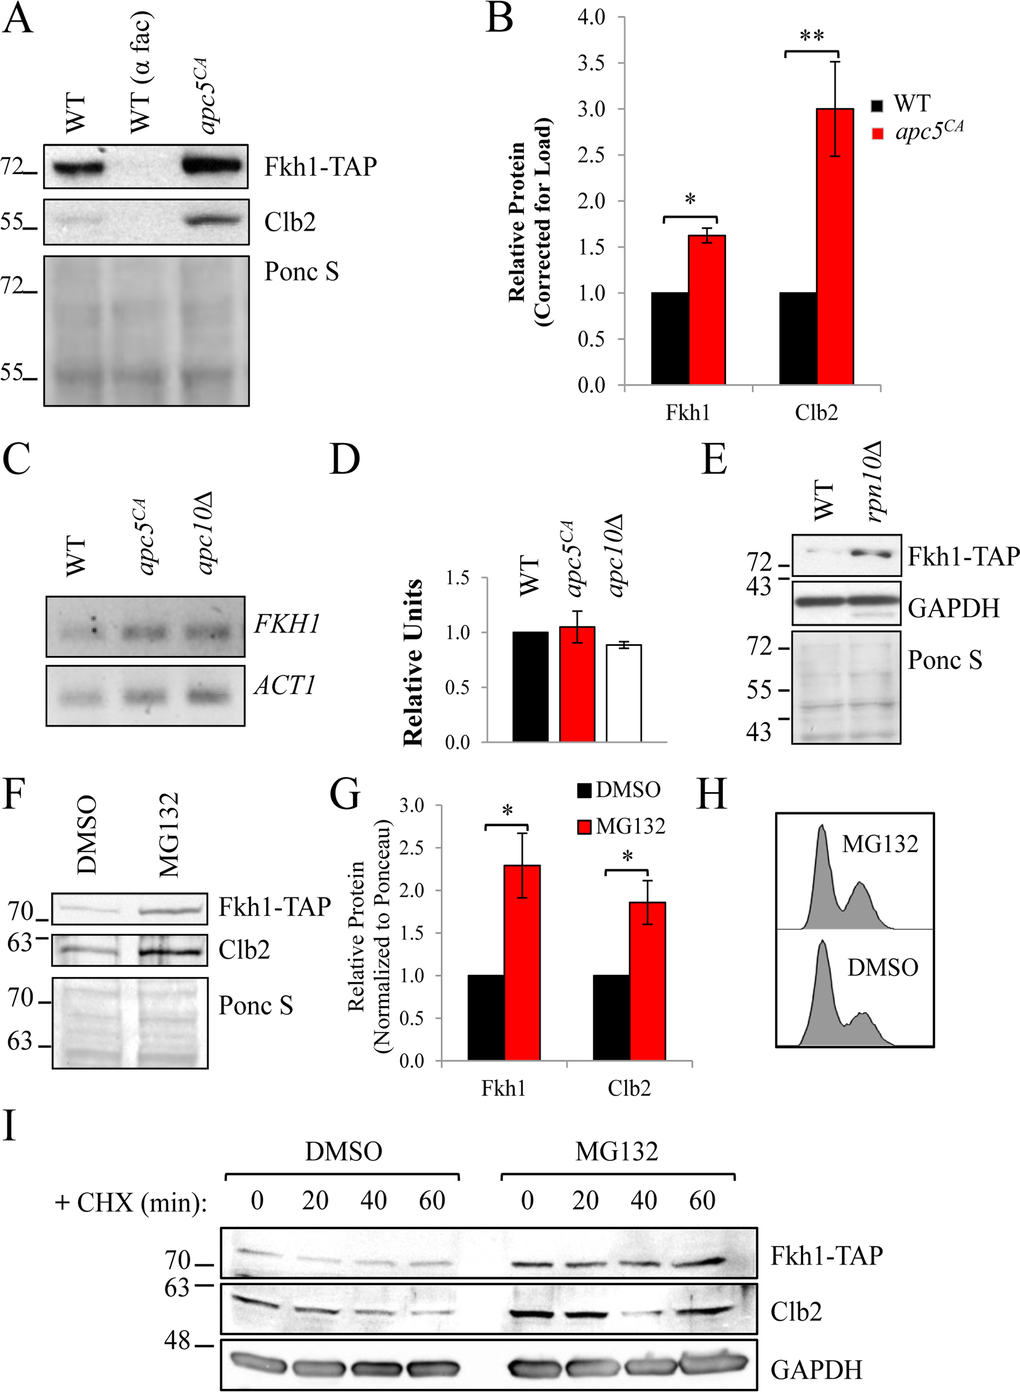 Fkh1 stability depends on the APC and the proteasome